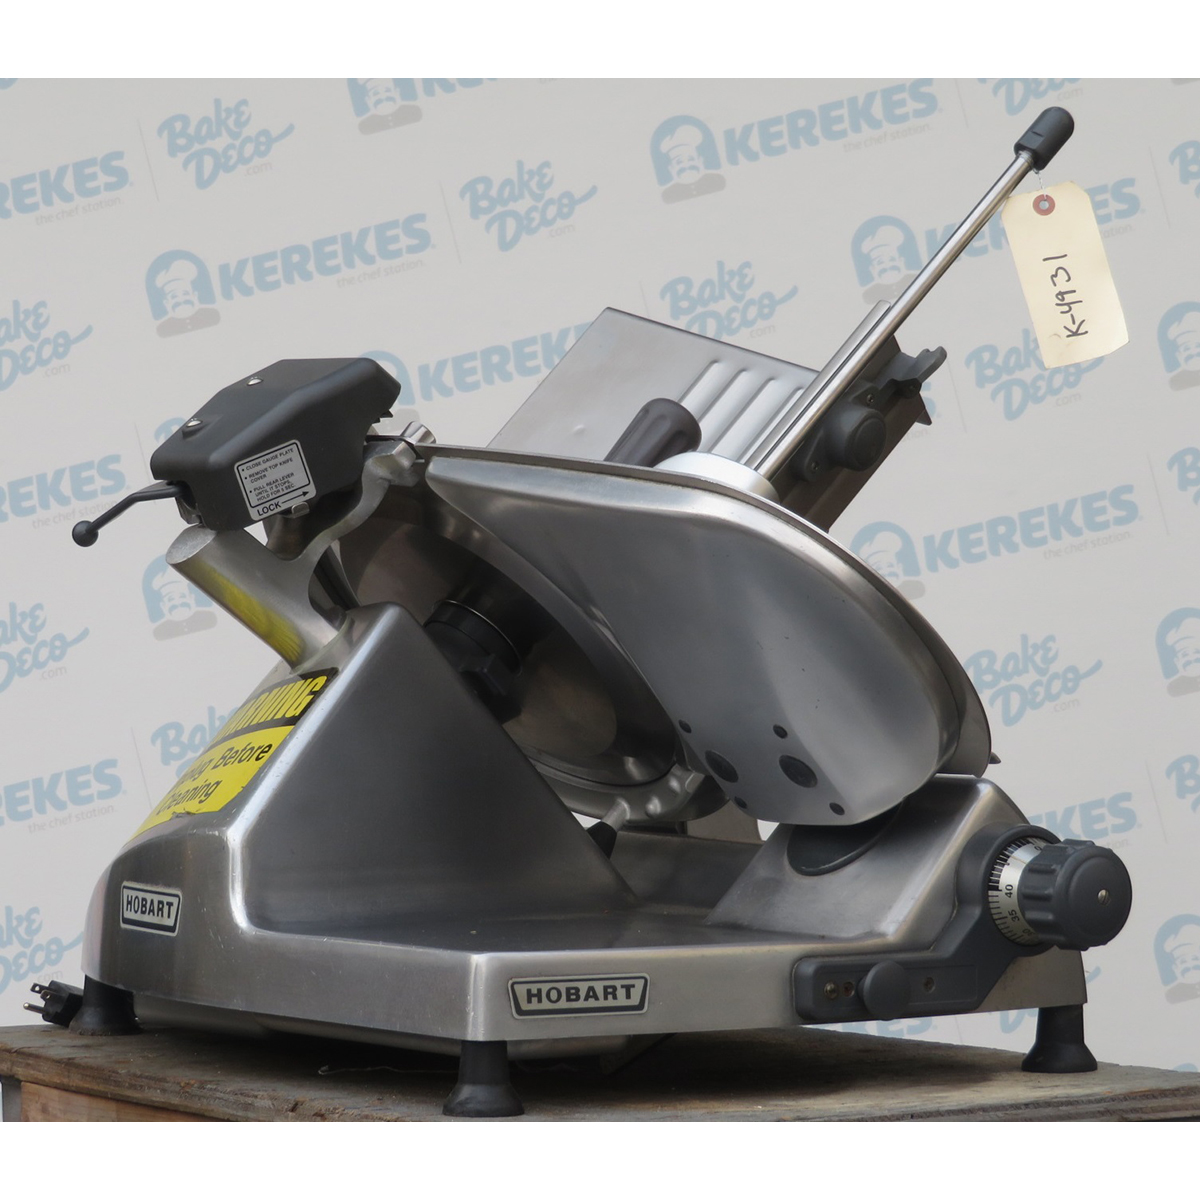 Hobart 2612 Meat Slicer, Used Excellent Condition